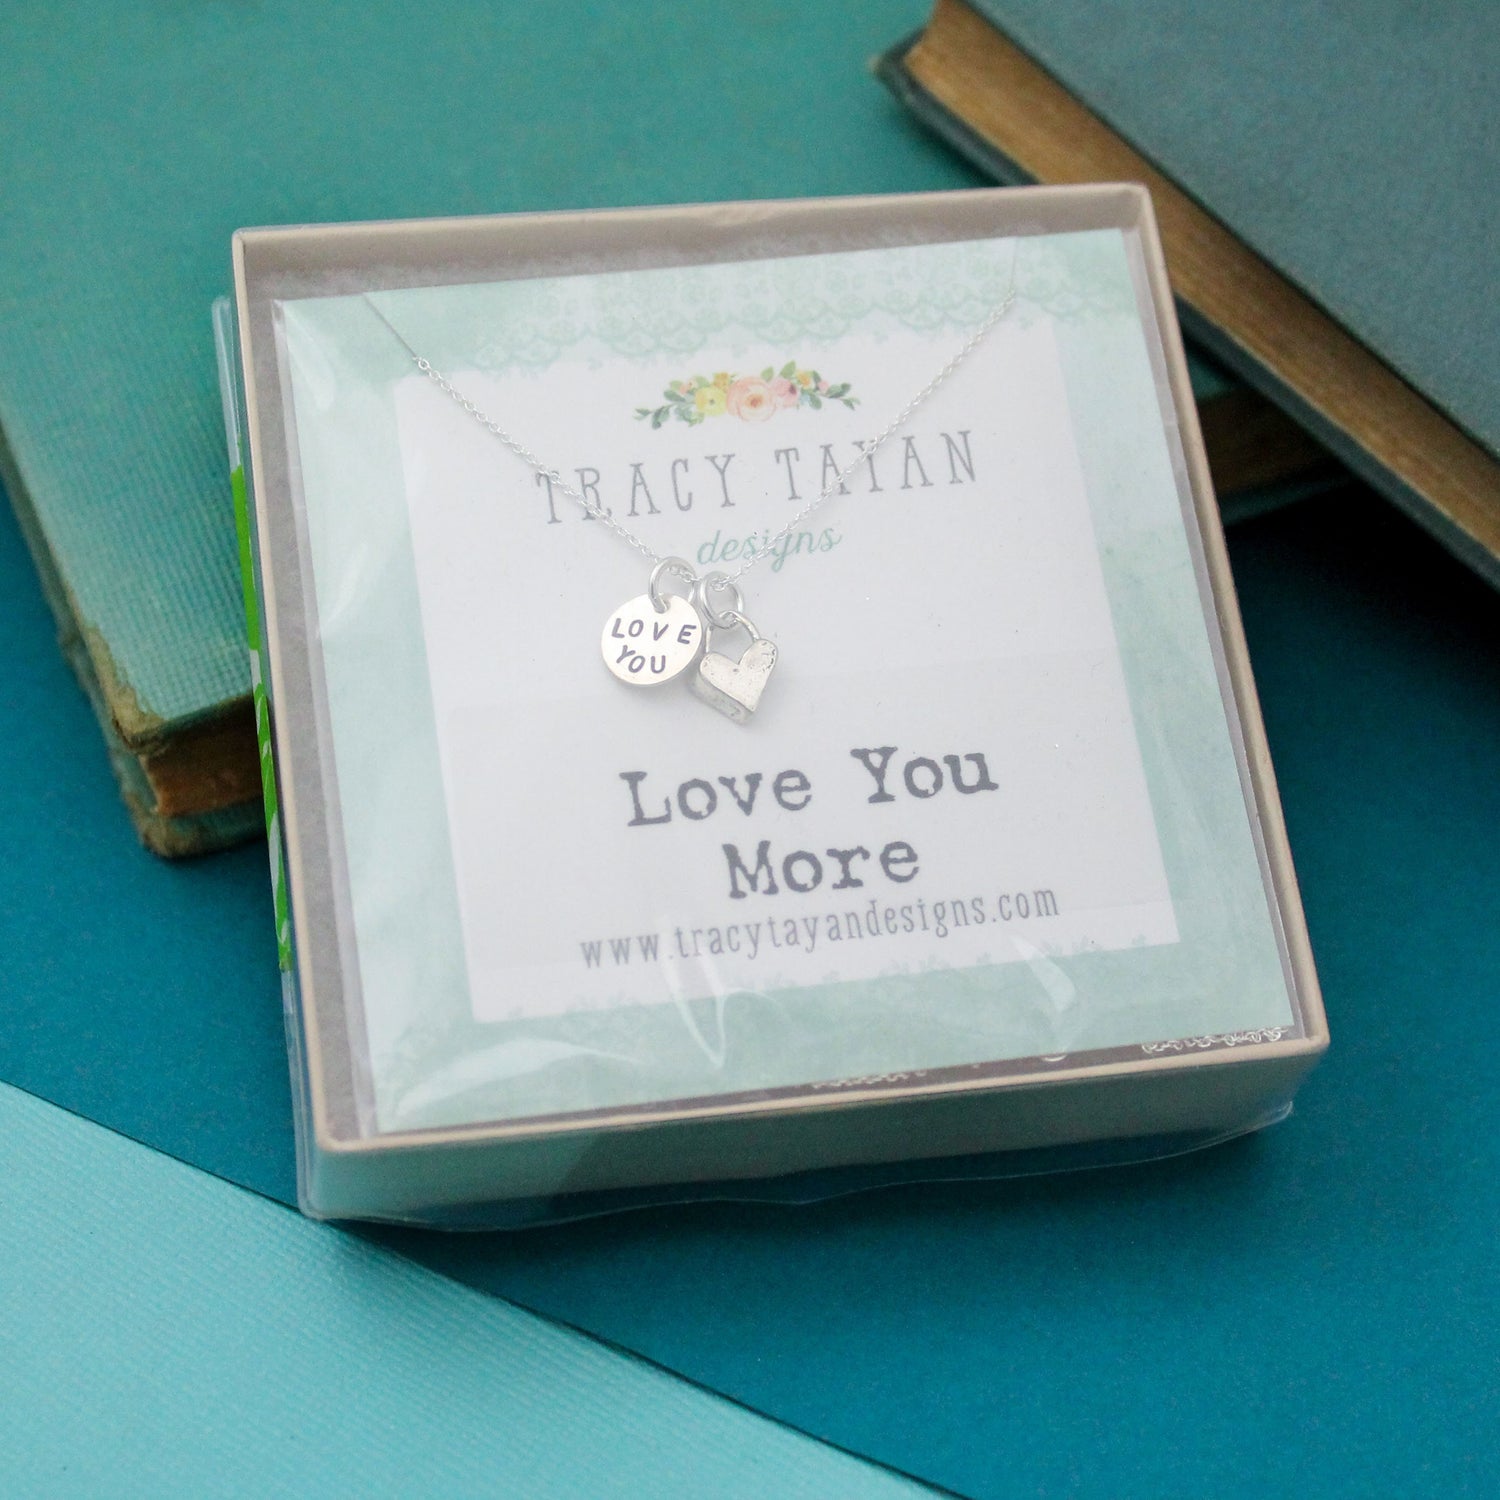 Love You More Necklace Personalized Sterling Silver, Hand Stamped Jewelry Gift, Love You Jewelry, Love You More Box Gift, Hand-Stamped Love